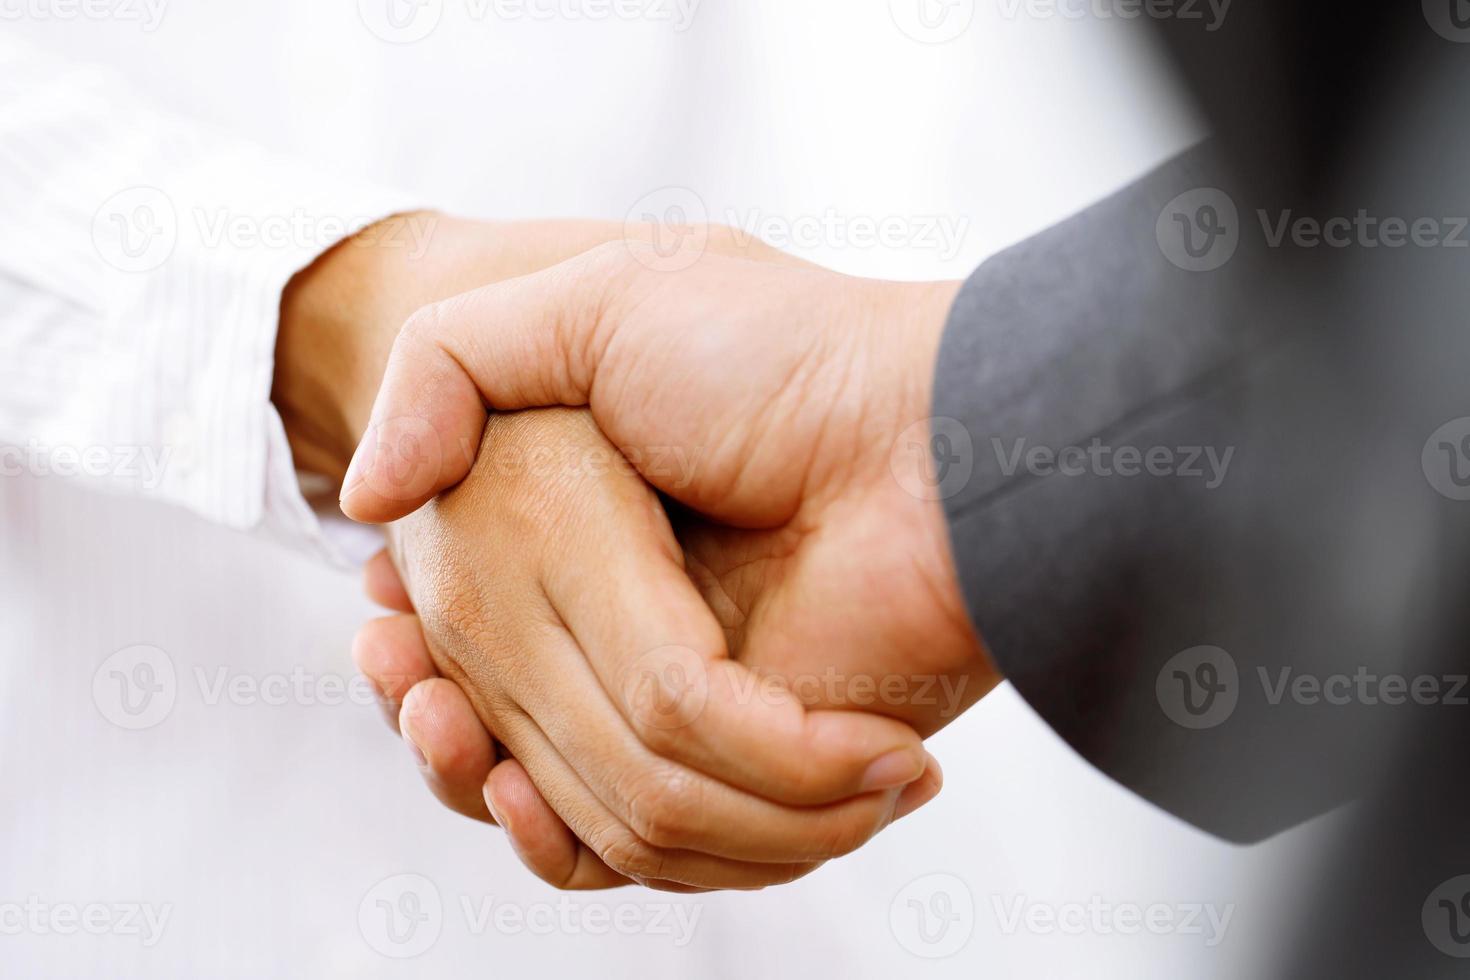 Closeup of a business hand shake between two colleagues Plaid shirt photo